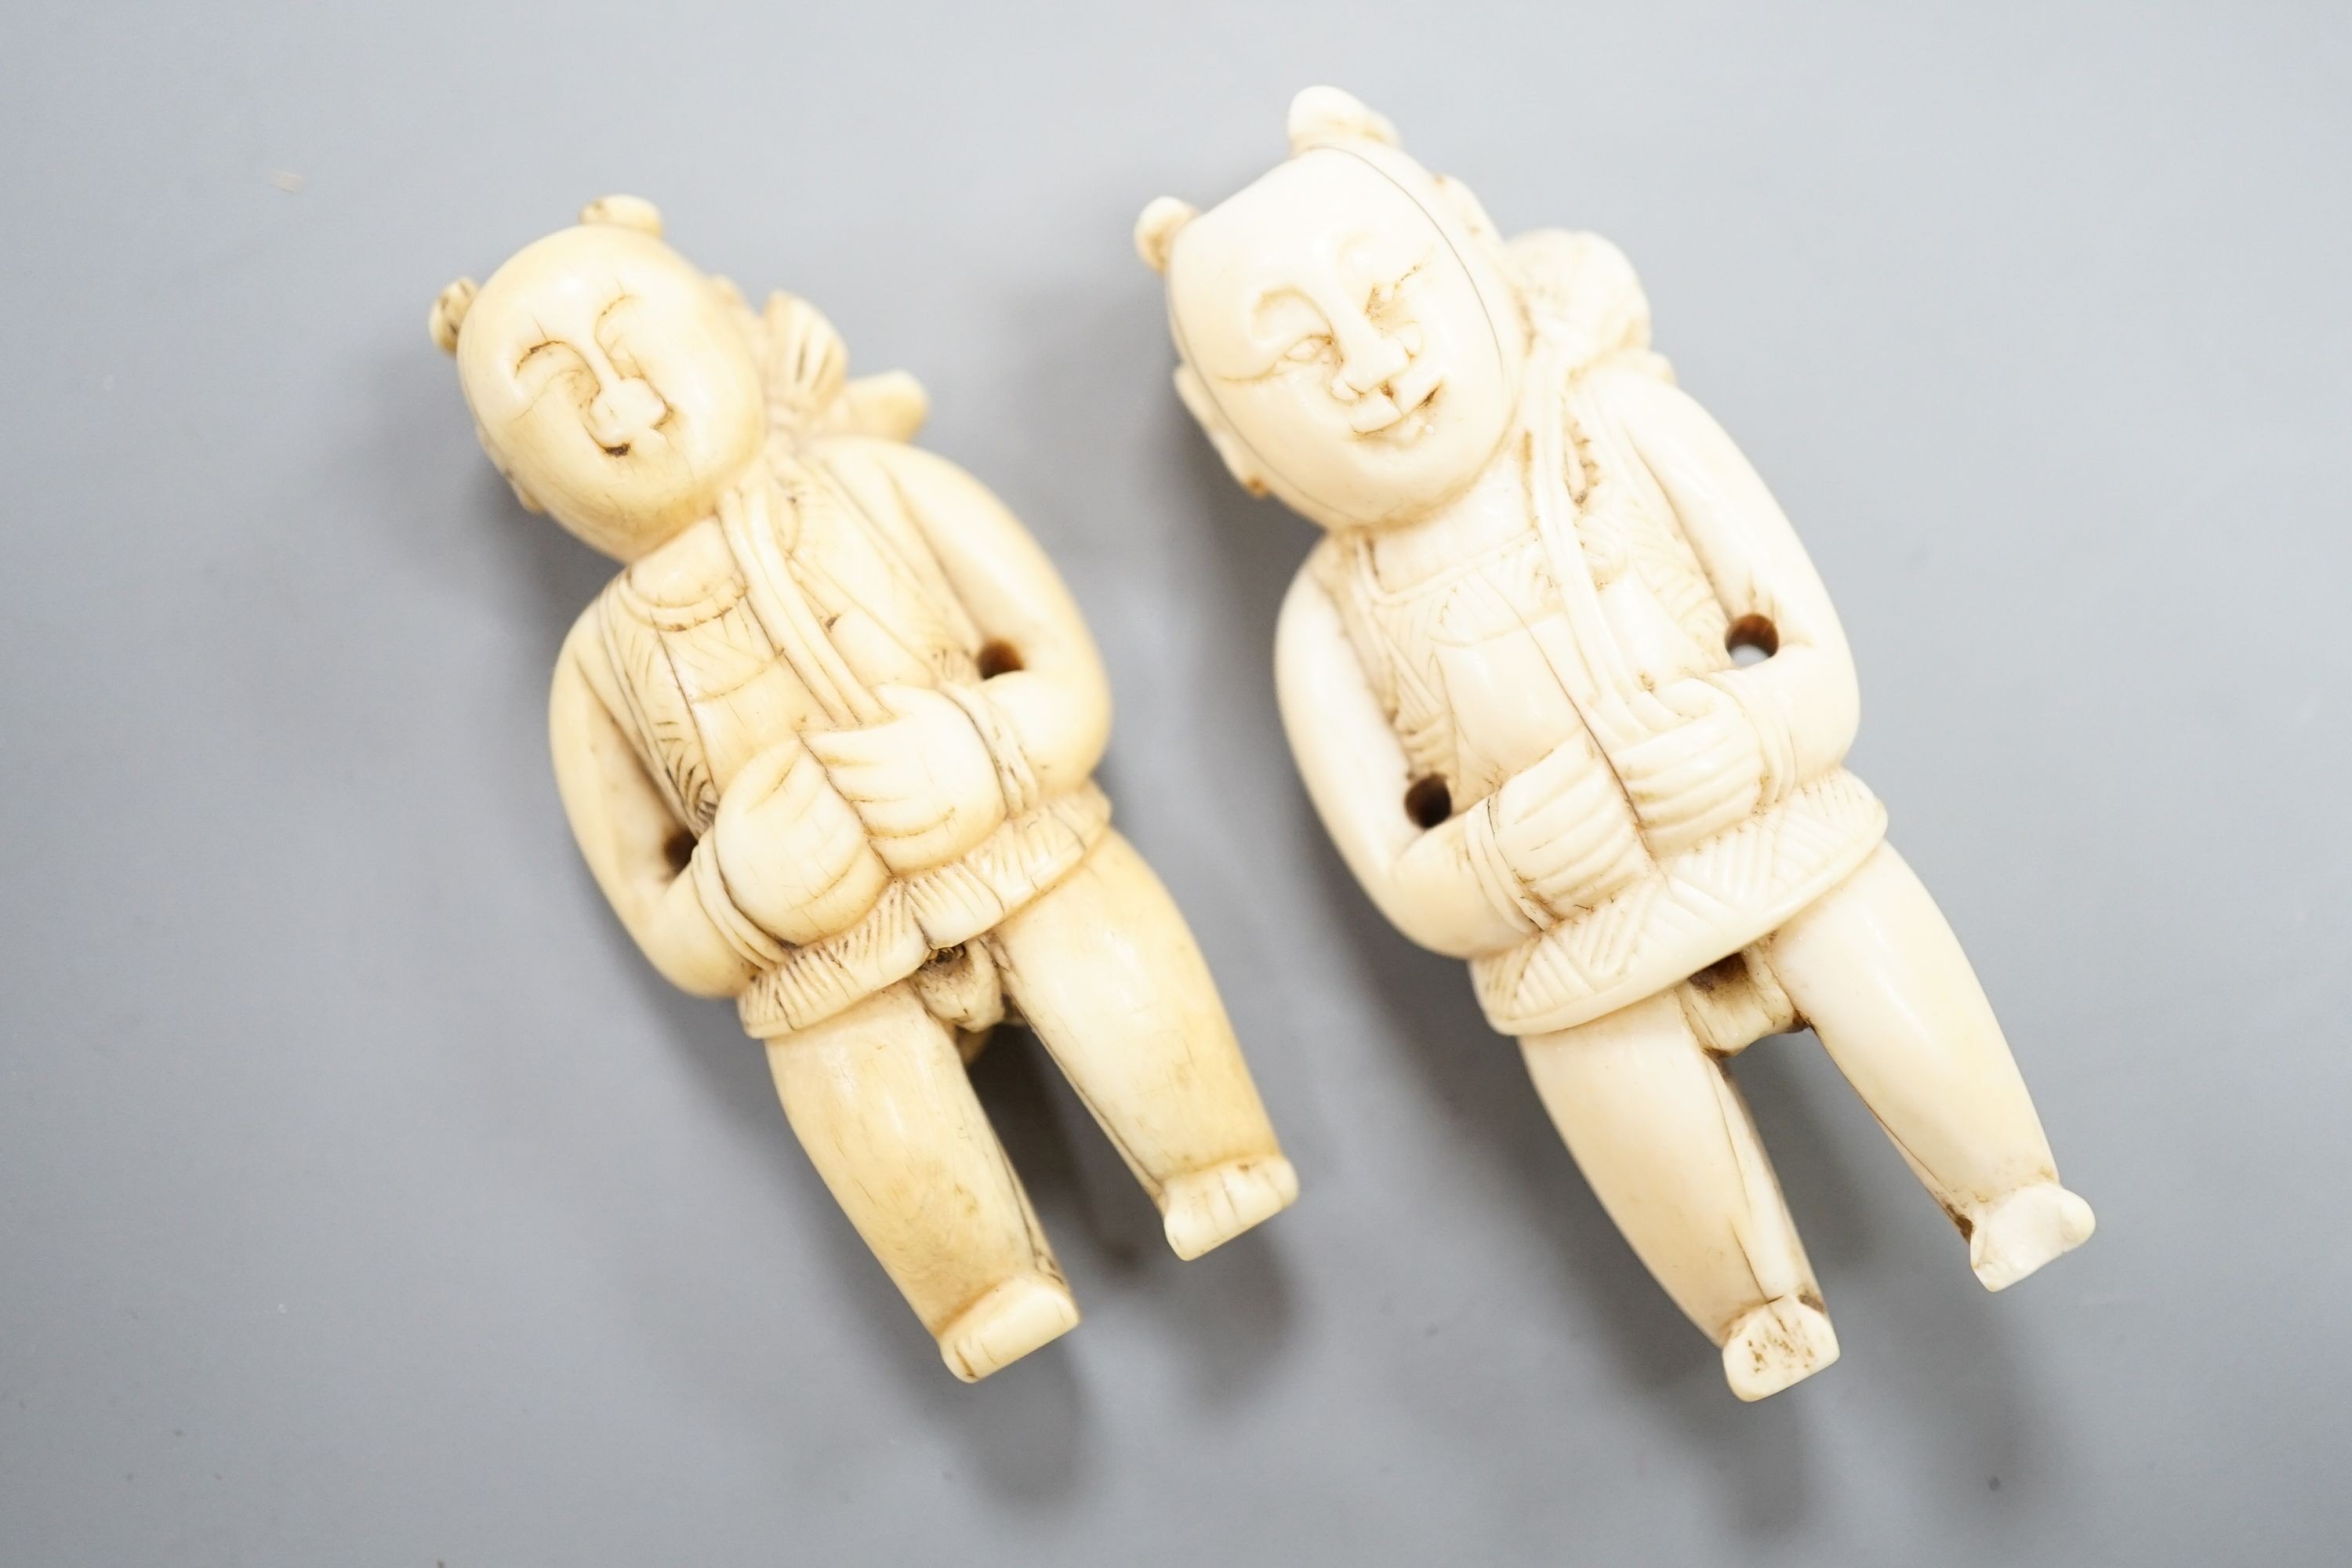 Two 19th century Chinese figural carved Ivory toggles, tallest 5.5 cm